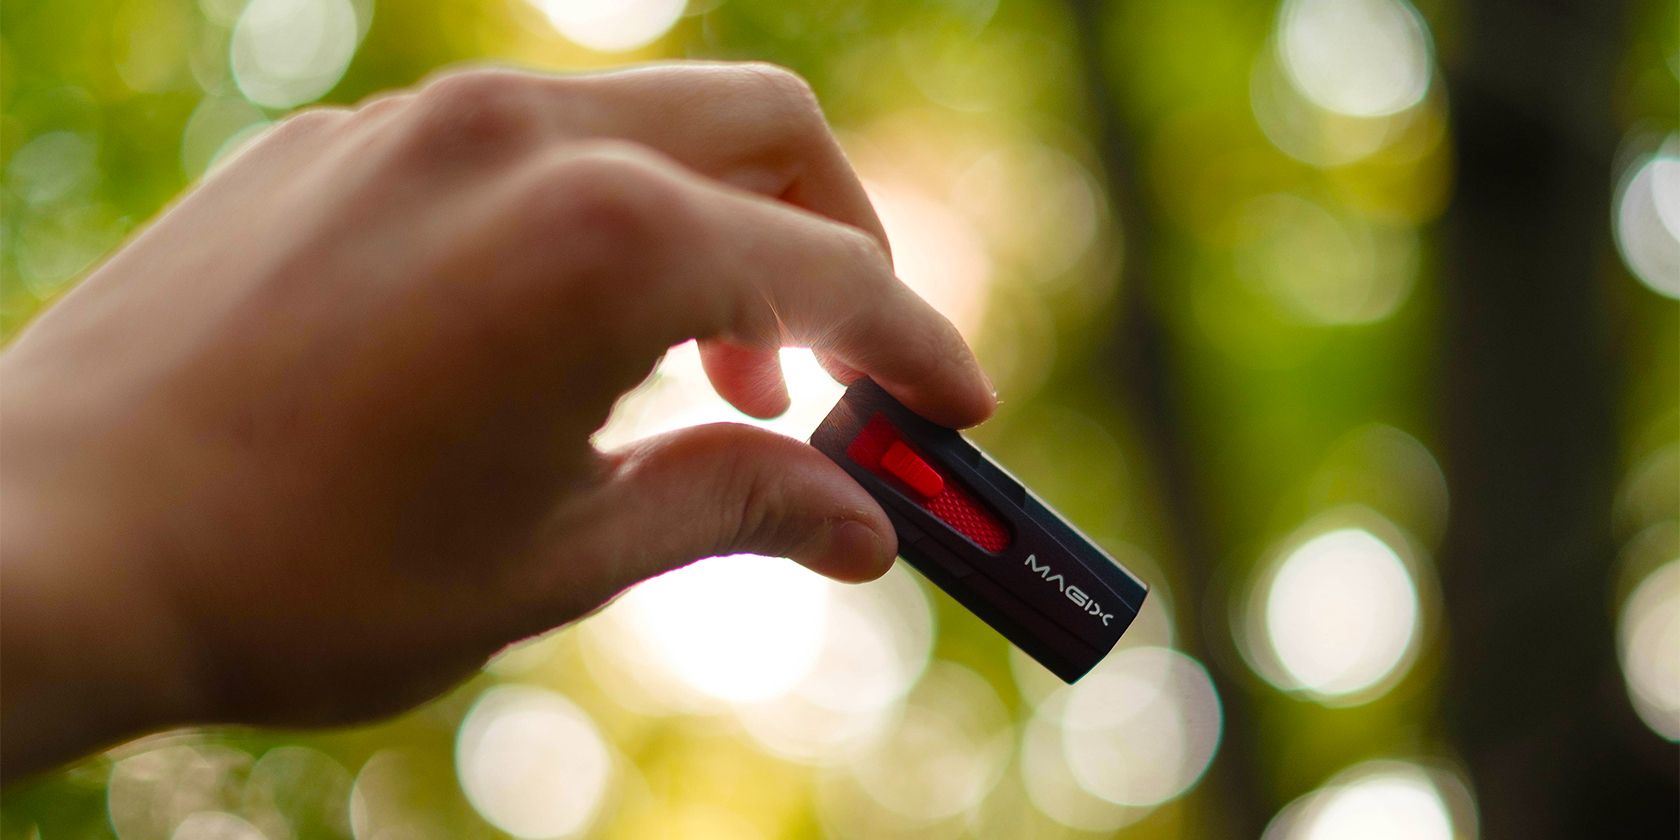 holding a USB flash drive for use with a smartphone